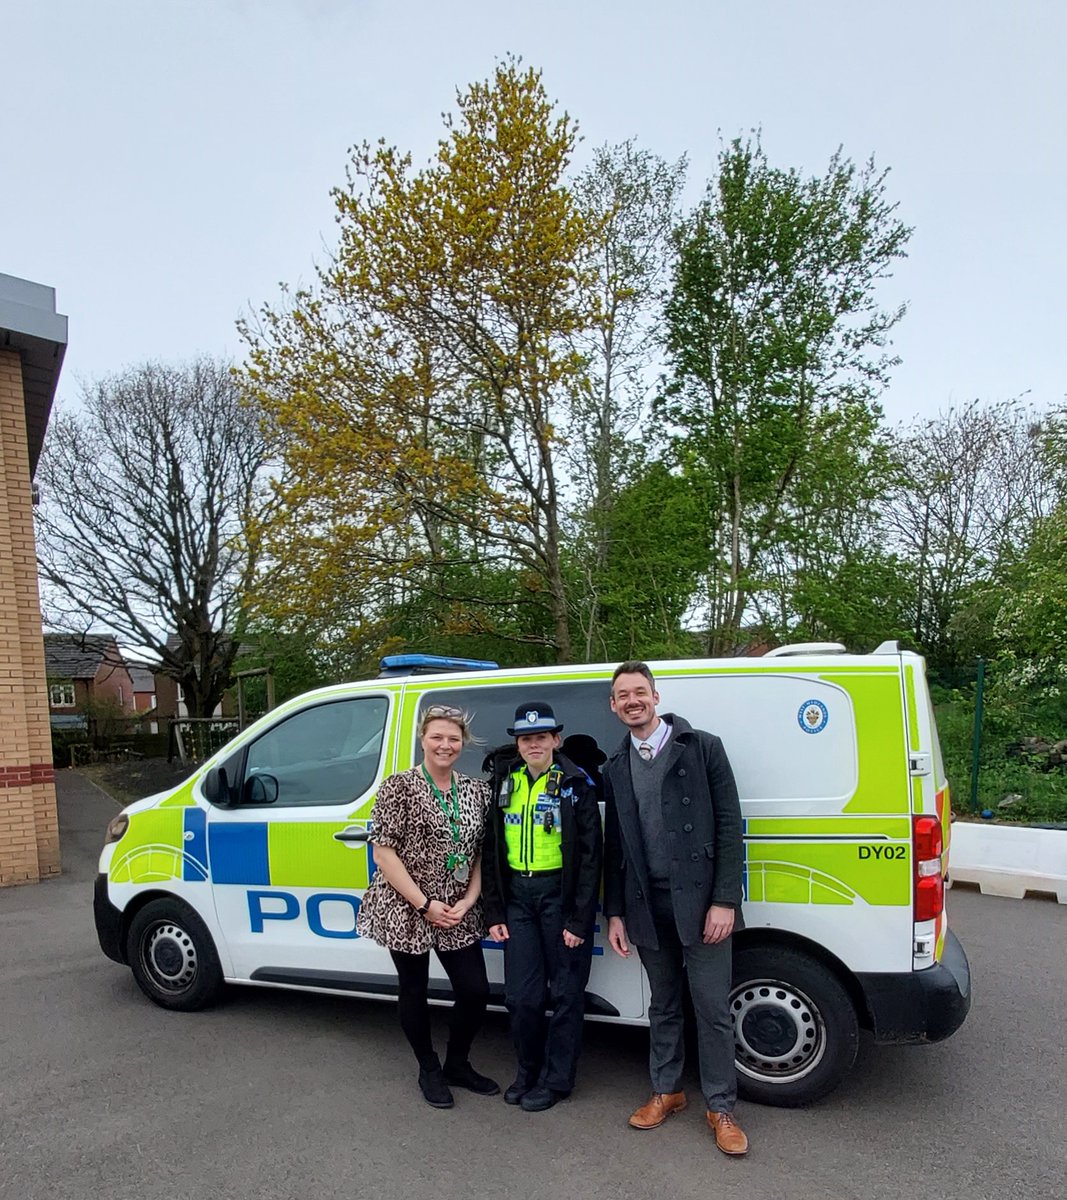 Halesowen NHT Officers have attended Hurst Green Primary School this afternoon for a meet and greet with students. Nice to see you all. #communityengagement